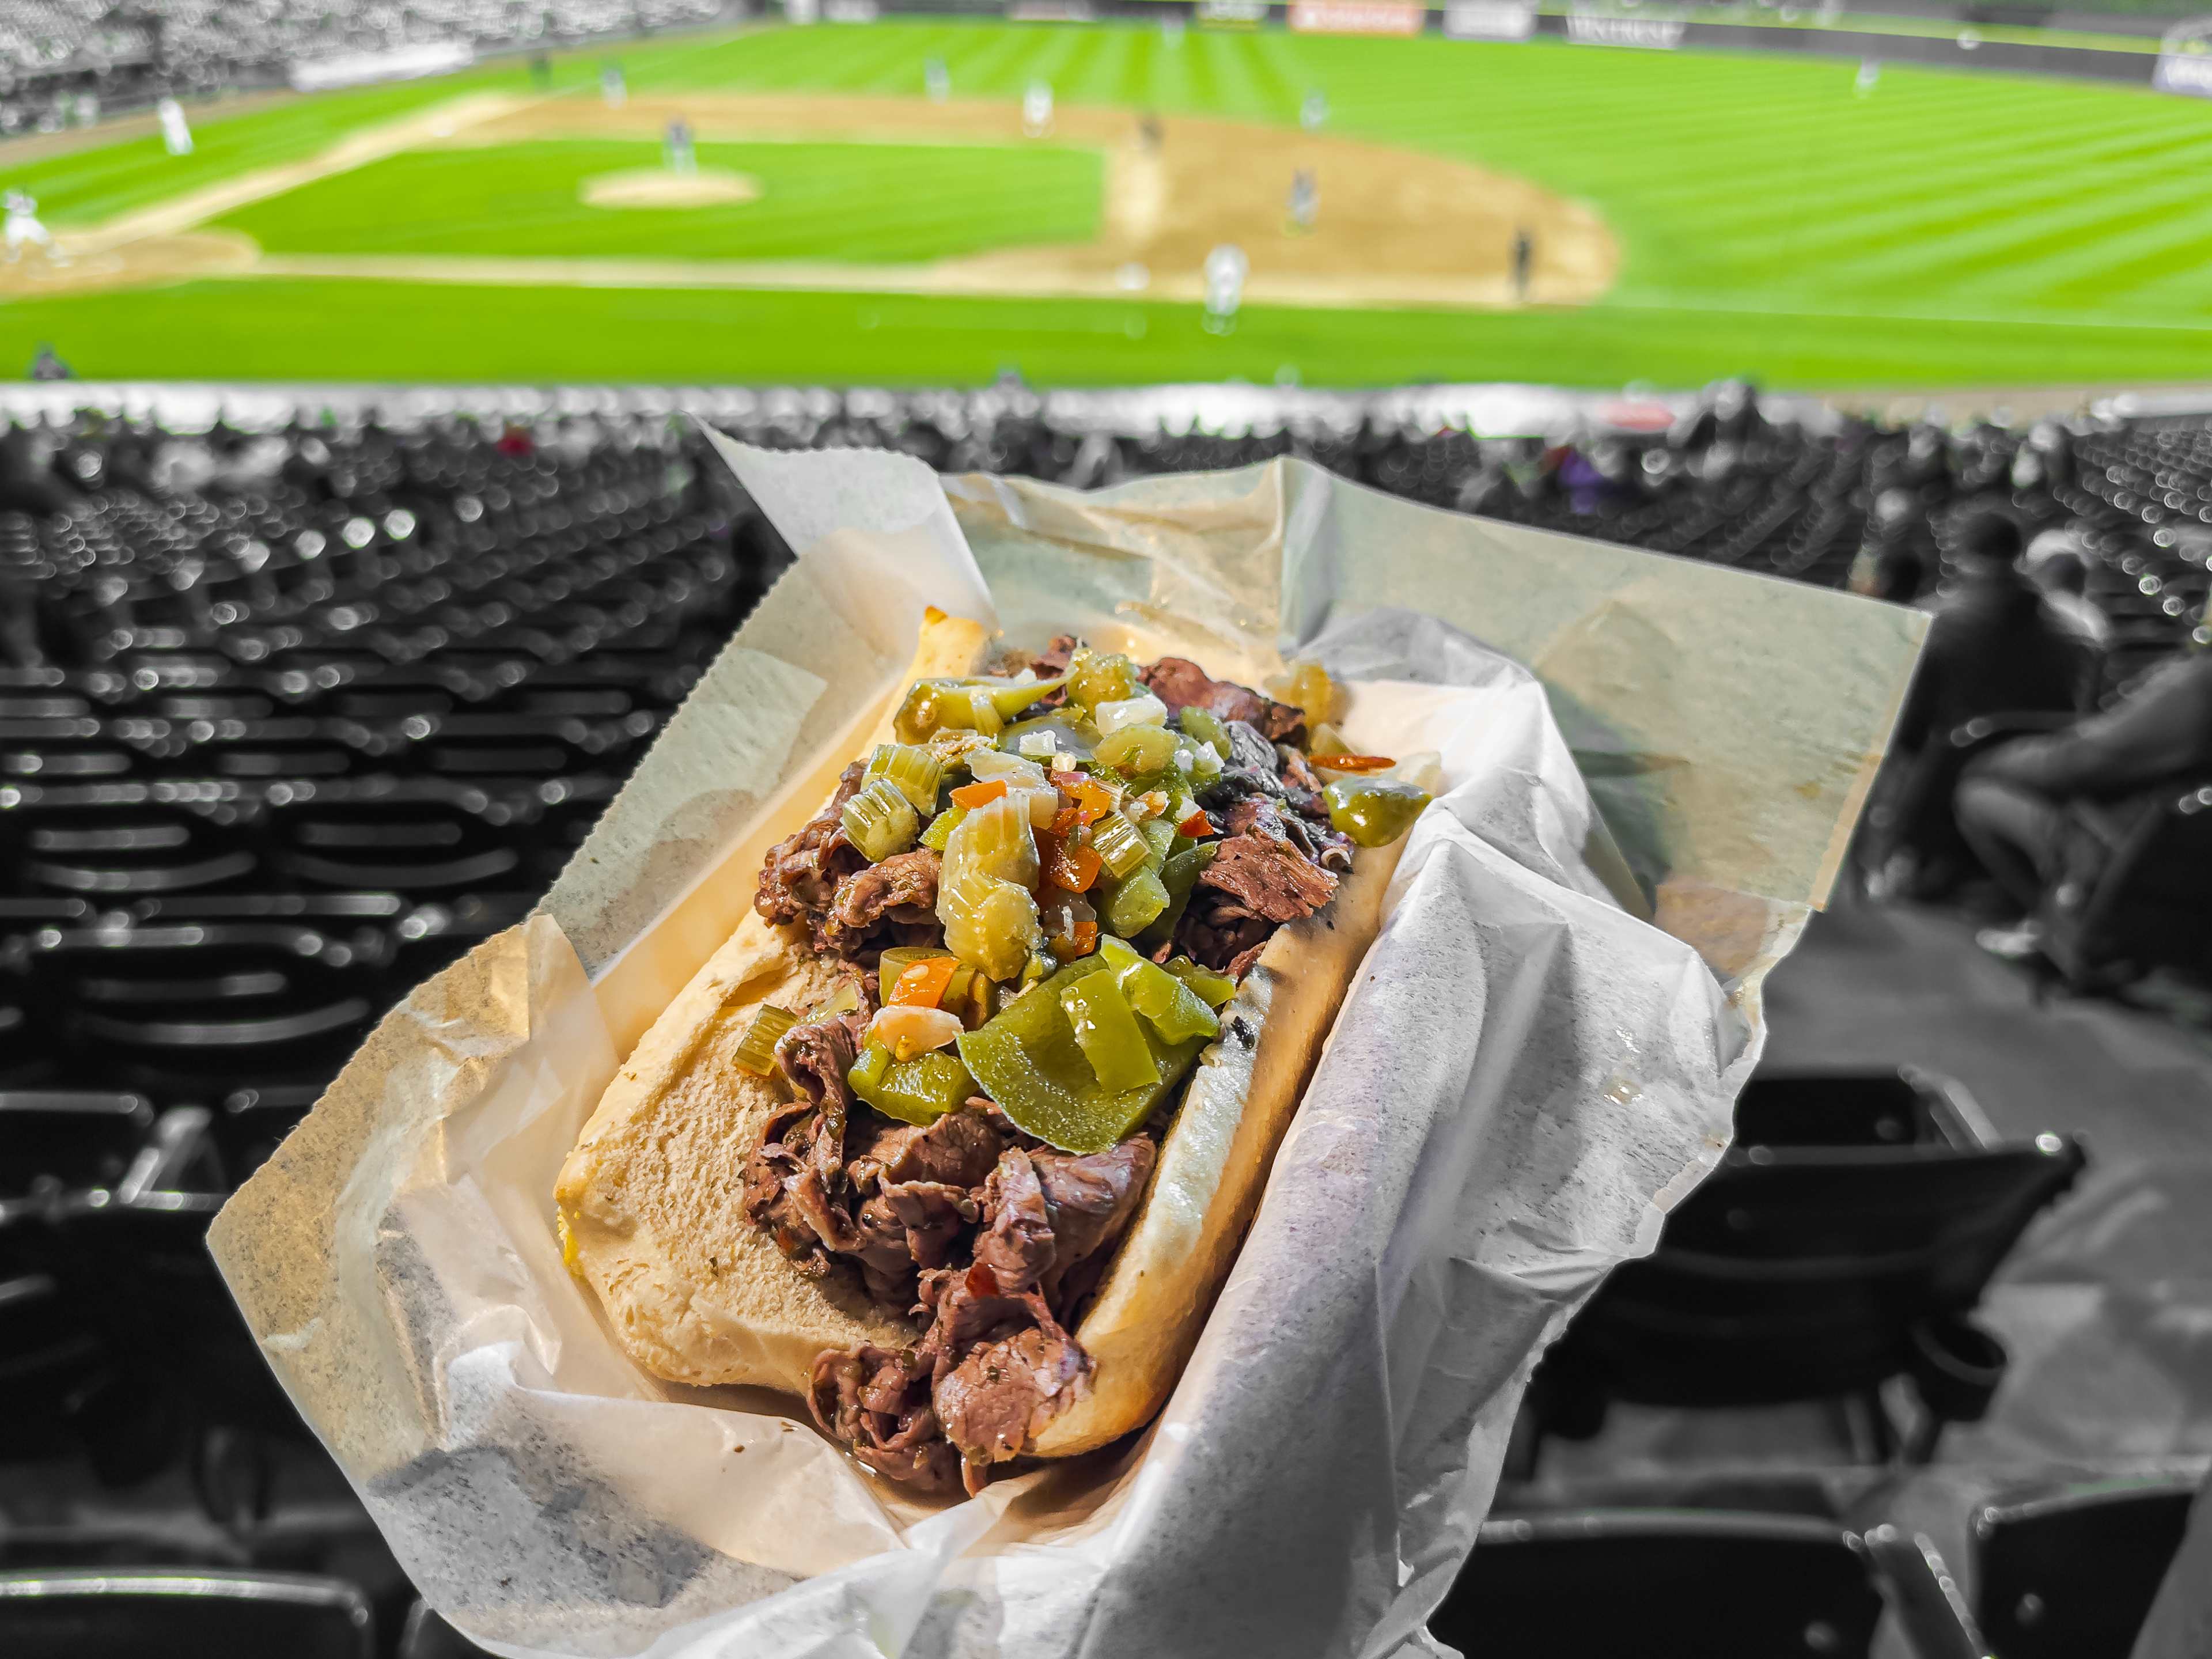 Italian beef held up in front of a baseball diamond and stadium seating